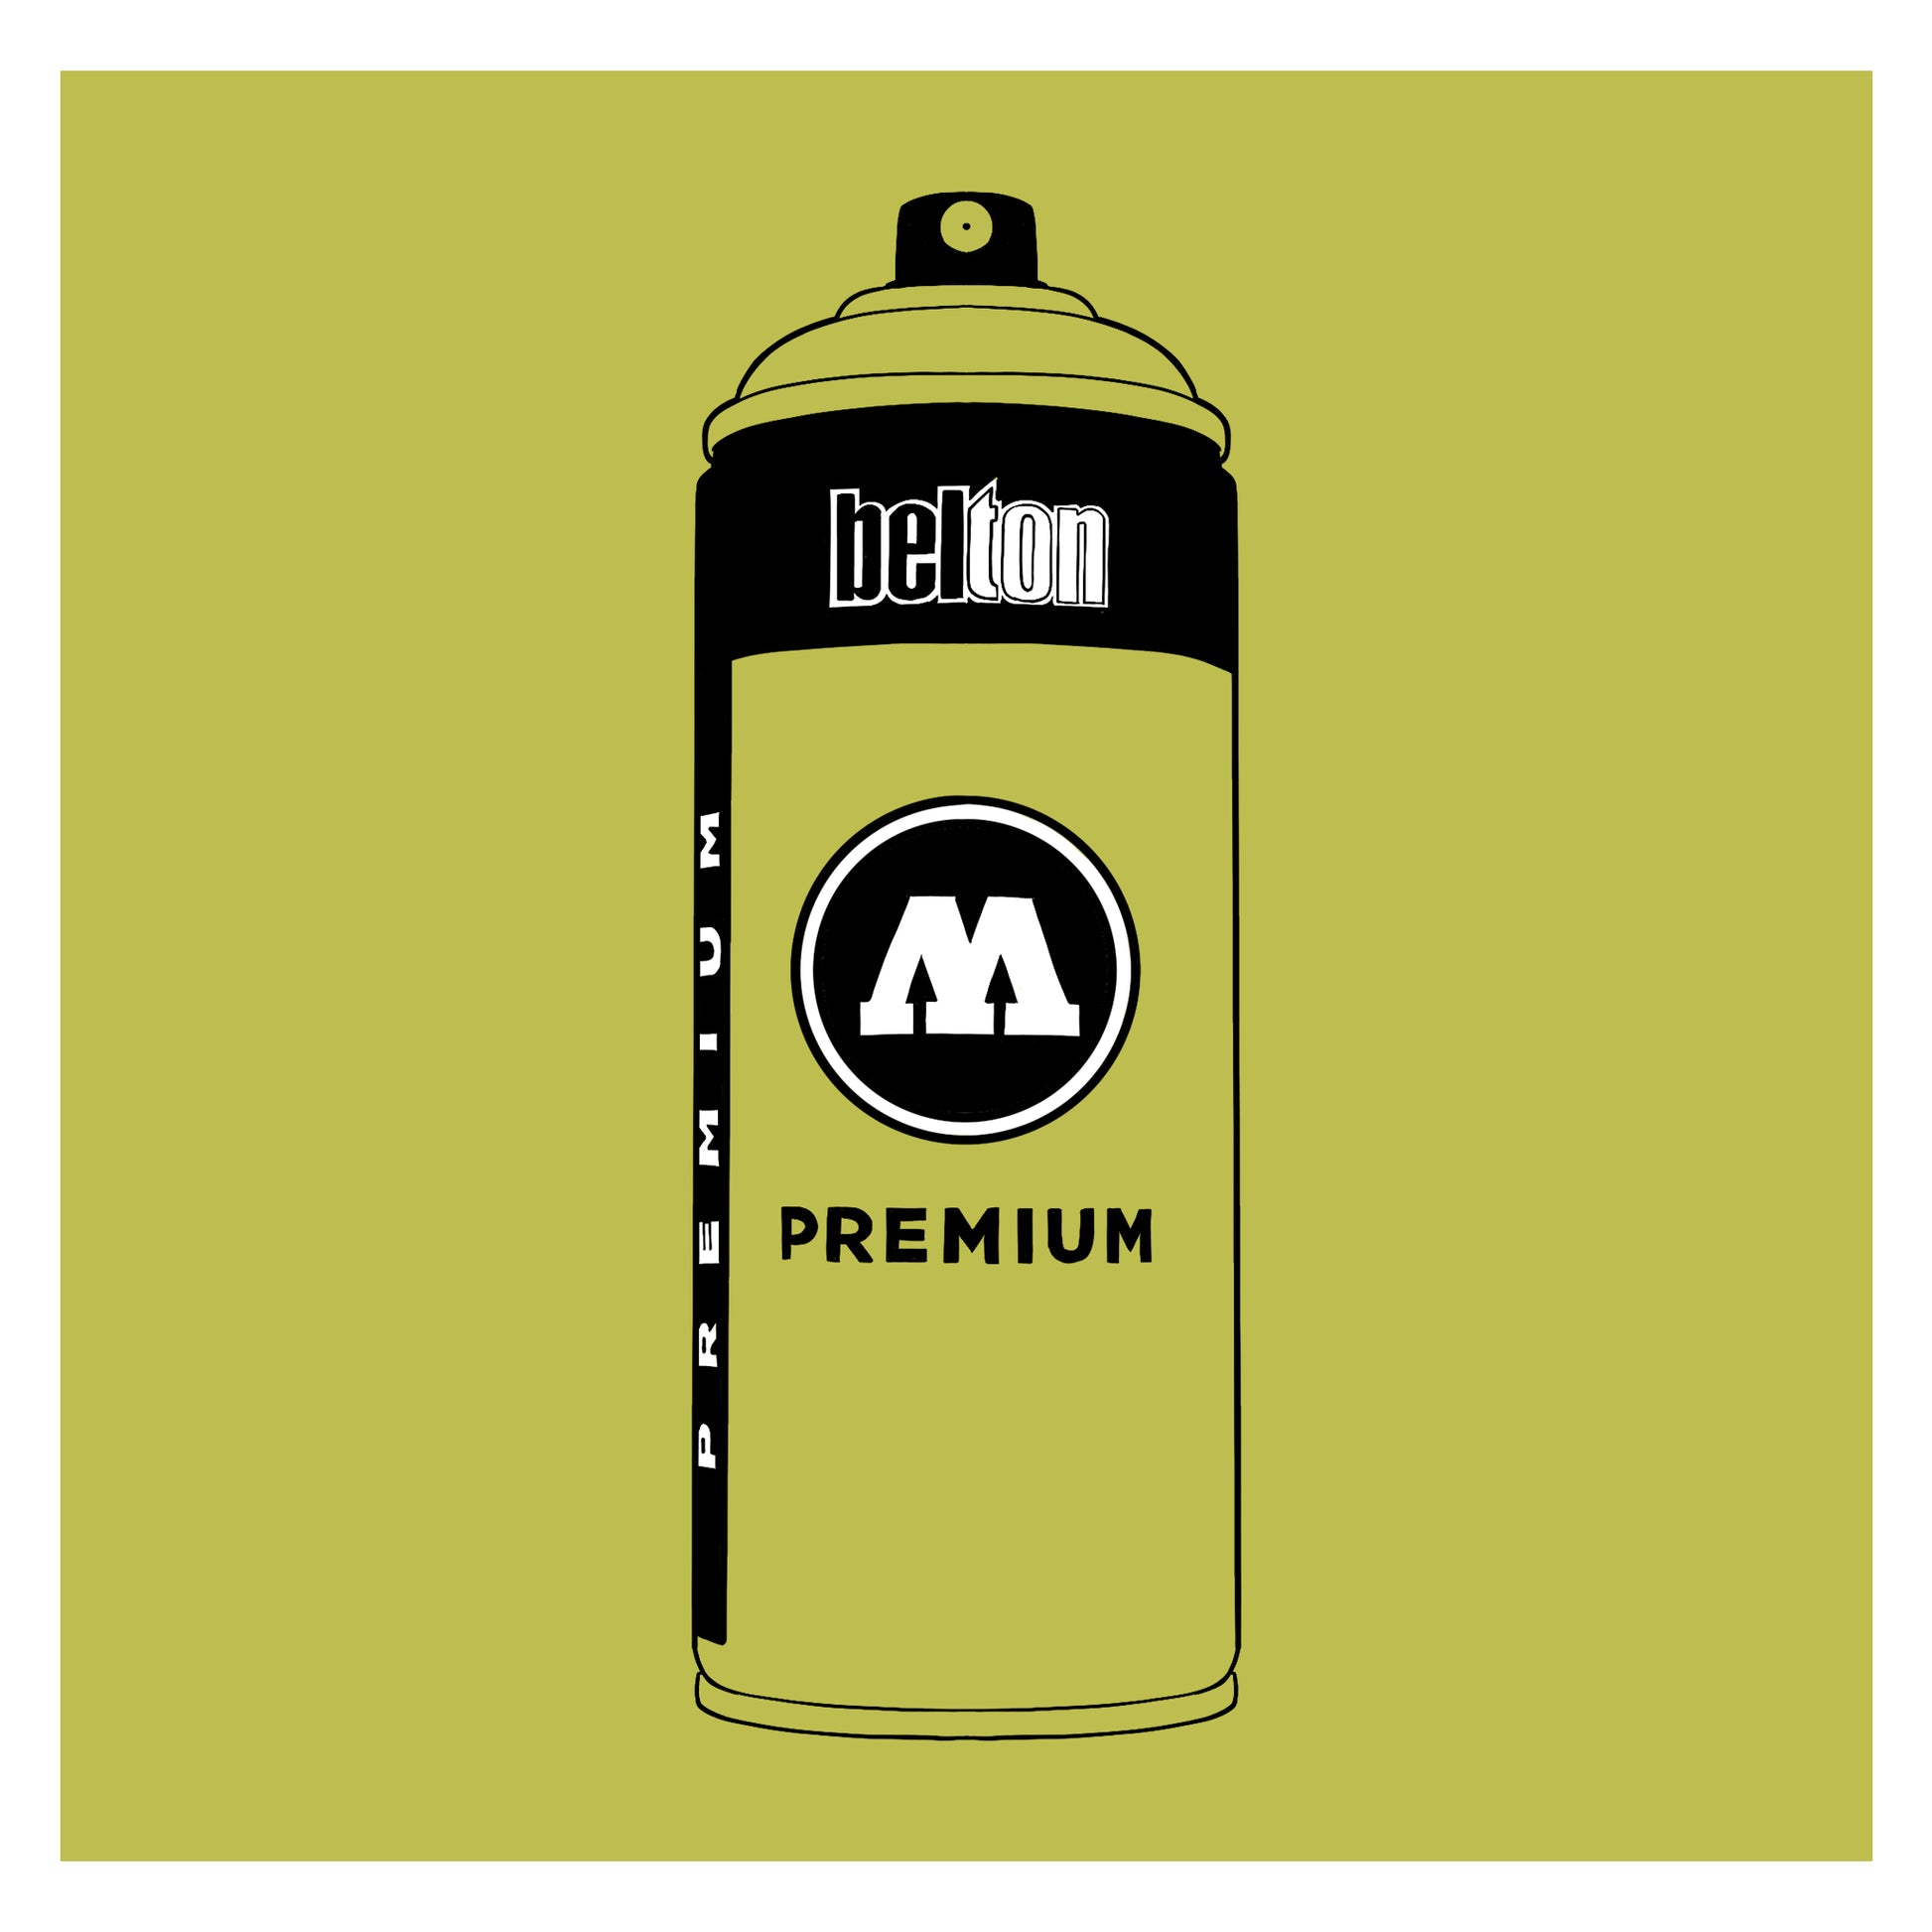 A black outline drawing of a pastel pea green spray paint can with the words "belton","premium" and the letter"M" written on the face in black and white font. The background is a color swatch of the same pea green with a white border